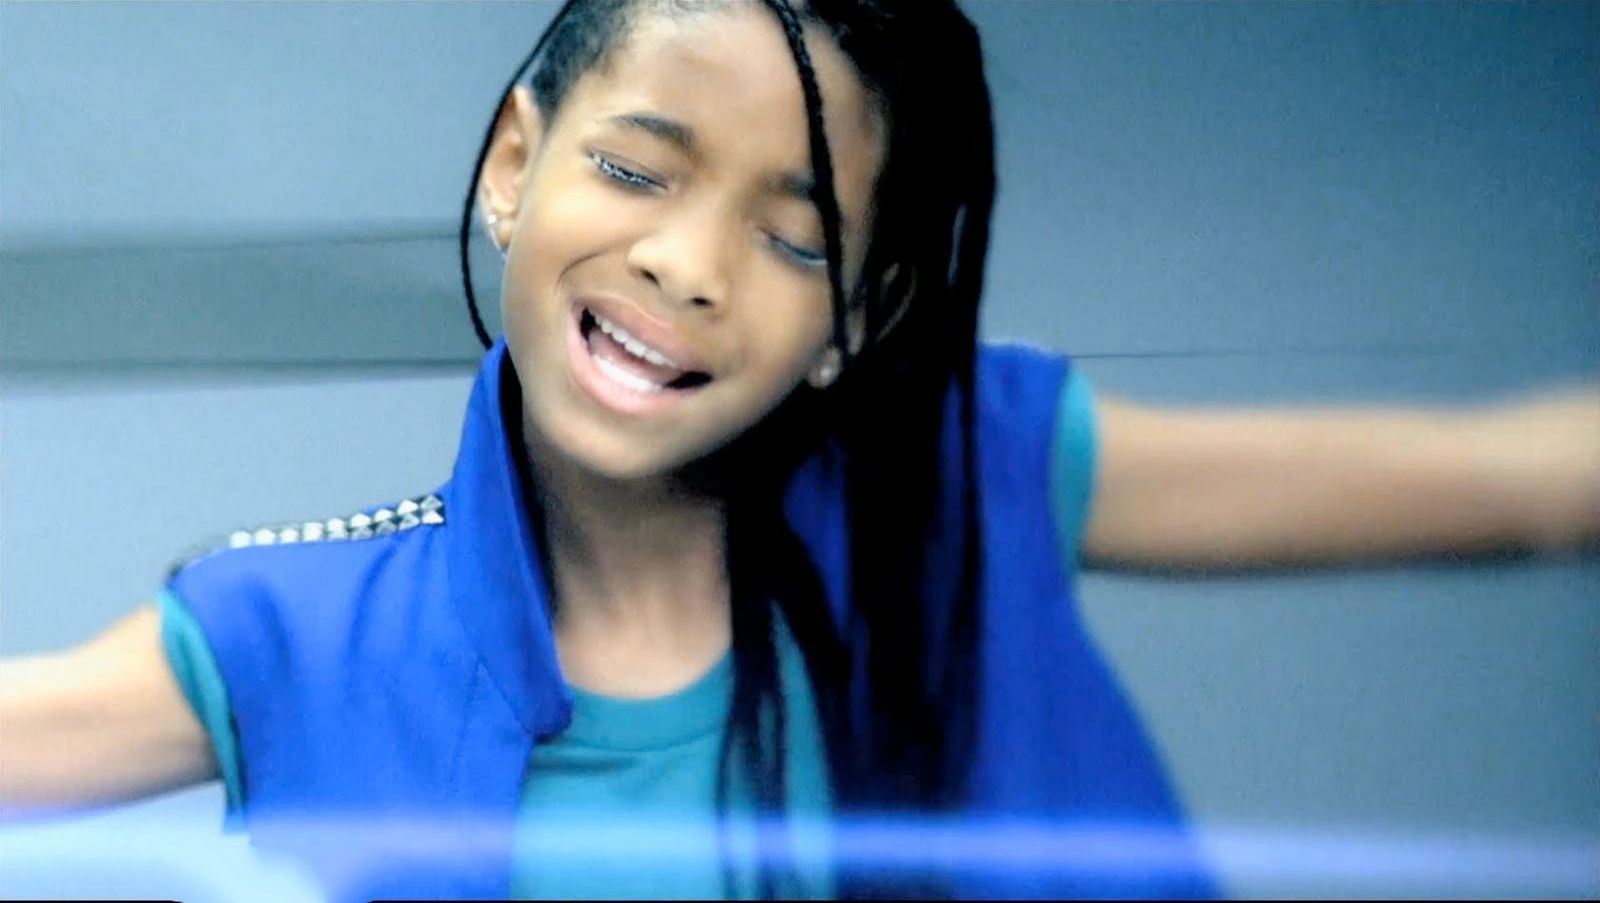 Willow Smith was forced to do hit song whip my hair by parents jada and will smith